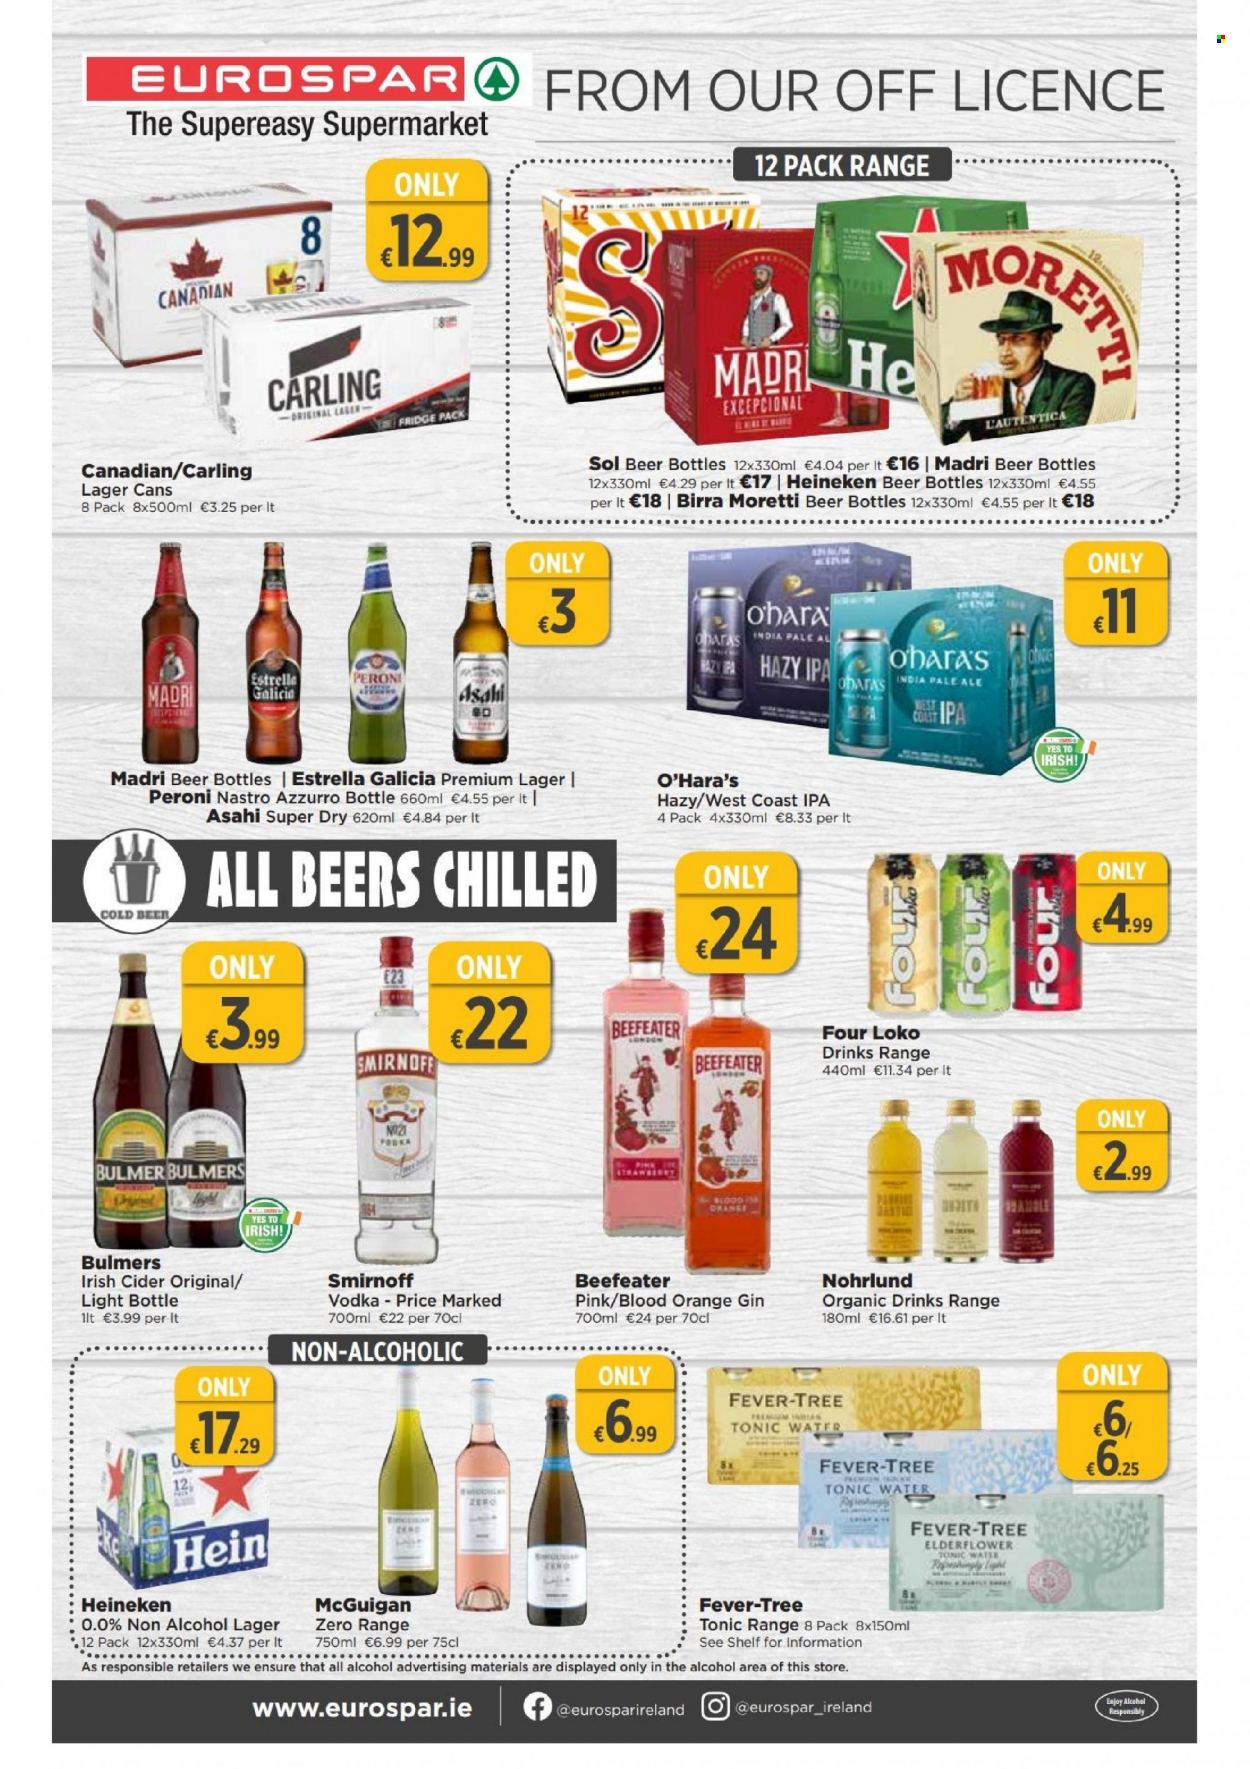 thumbnail - EUROSPAR offer  - 16.06.2022 - 06.07.2022 - Sales products - tonic, alcohol, gin, Smirnoff, vodka, punch, Beefeater, cider, beer, Heineken, Bulmers, Peroni, Carling, Sol, Lager, IPA. Page 16.